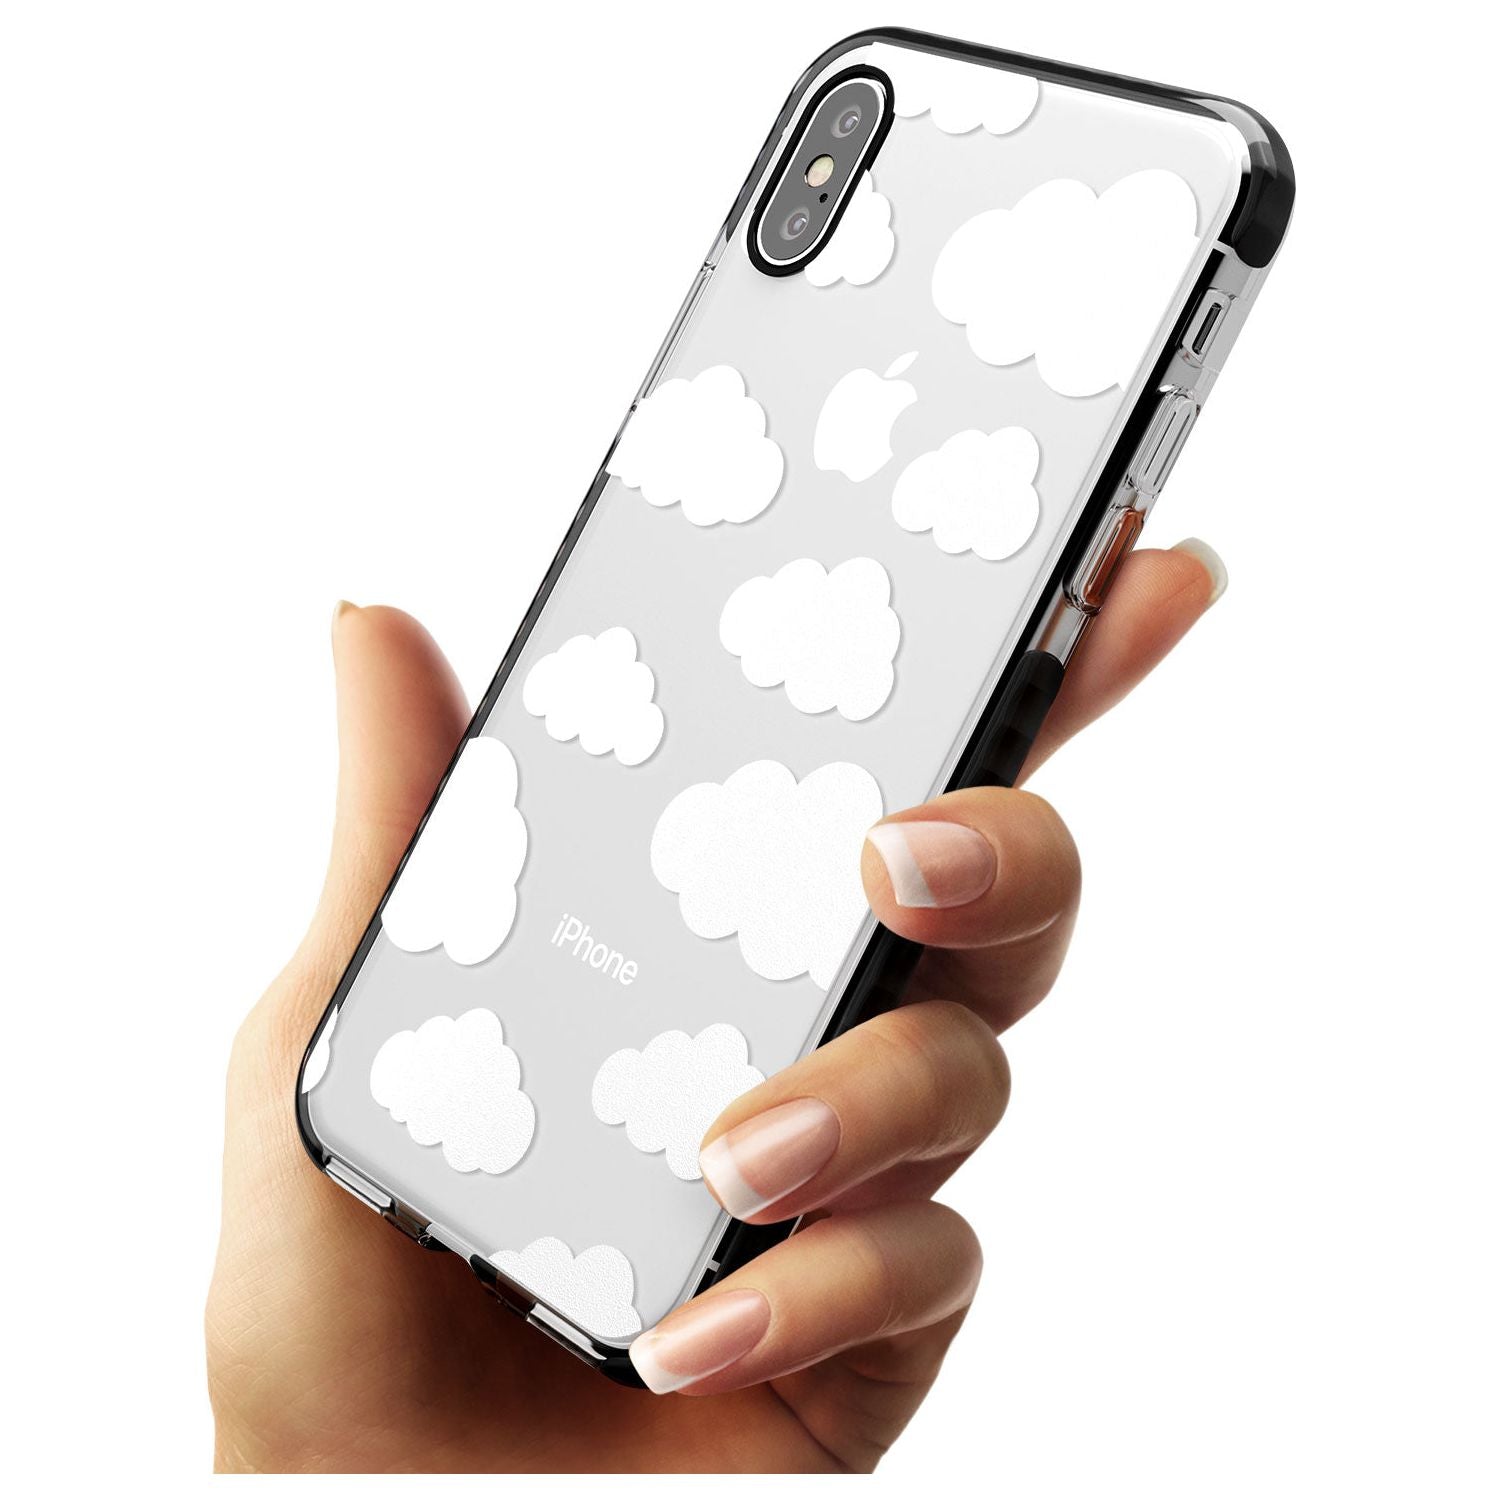 Transparent Cloud Pattern Pink Fade Impact Phone Case for iPhone X XS Max XR